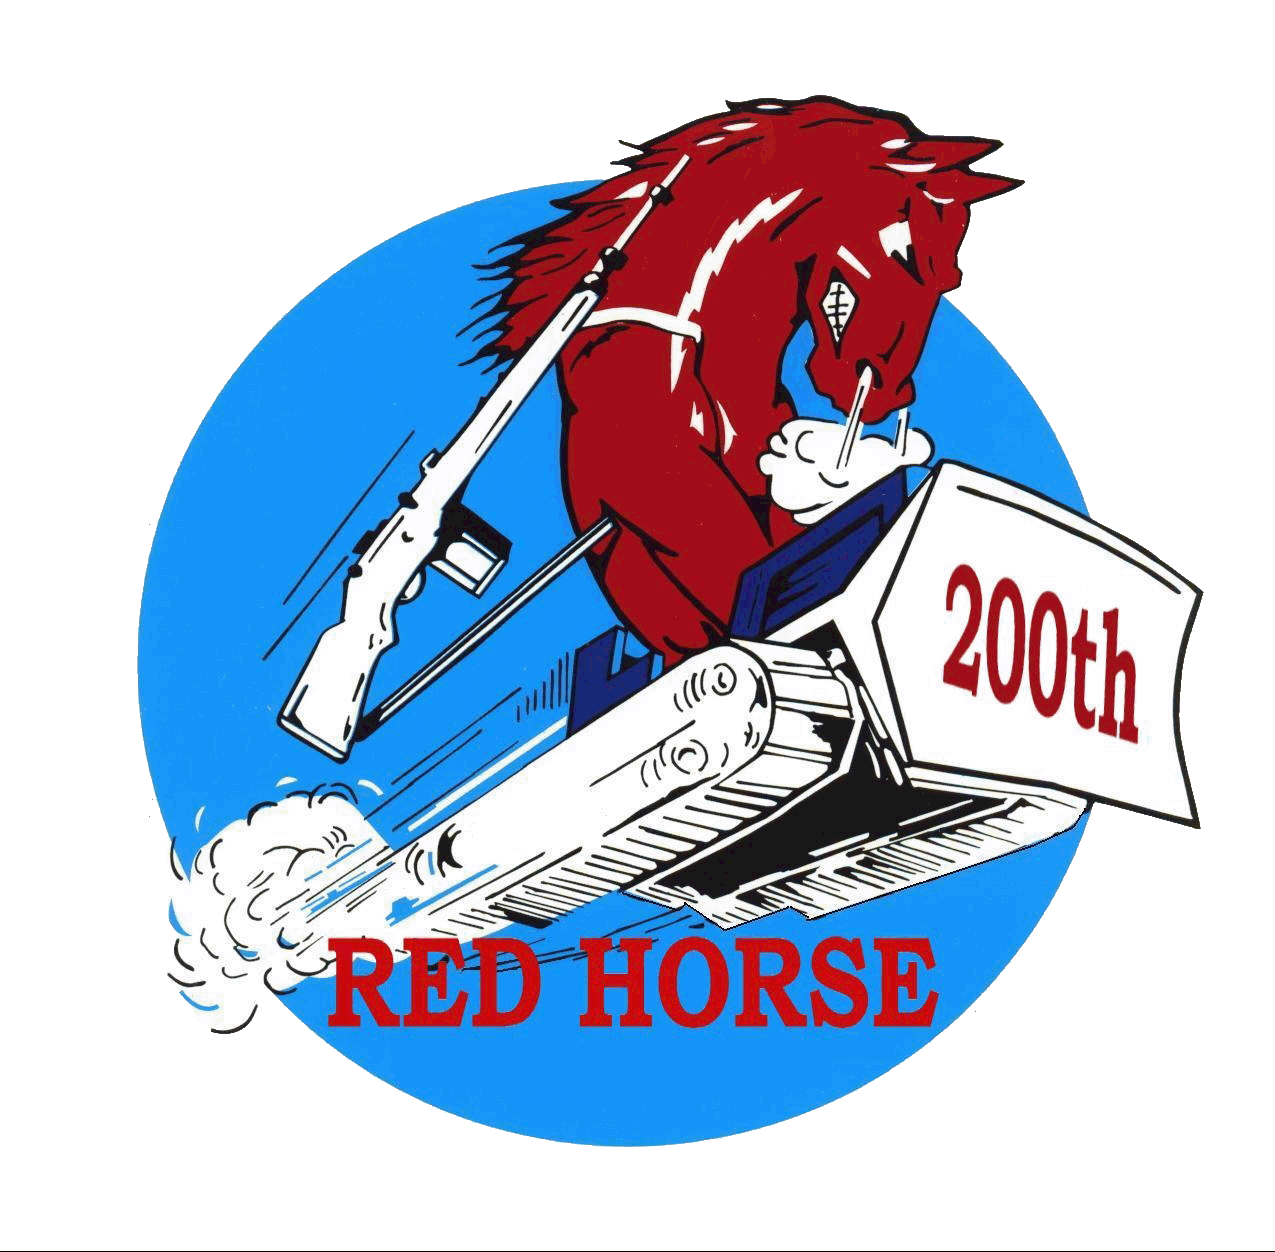 Graphic: 200th RED HORSE Charging Charlie riding heavy dirt moving equipment 